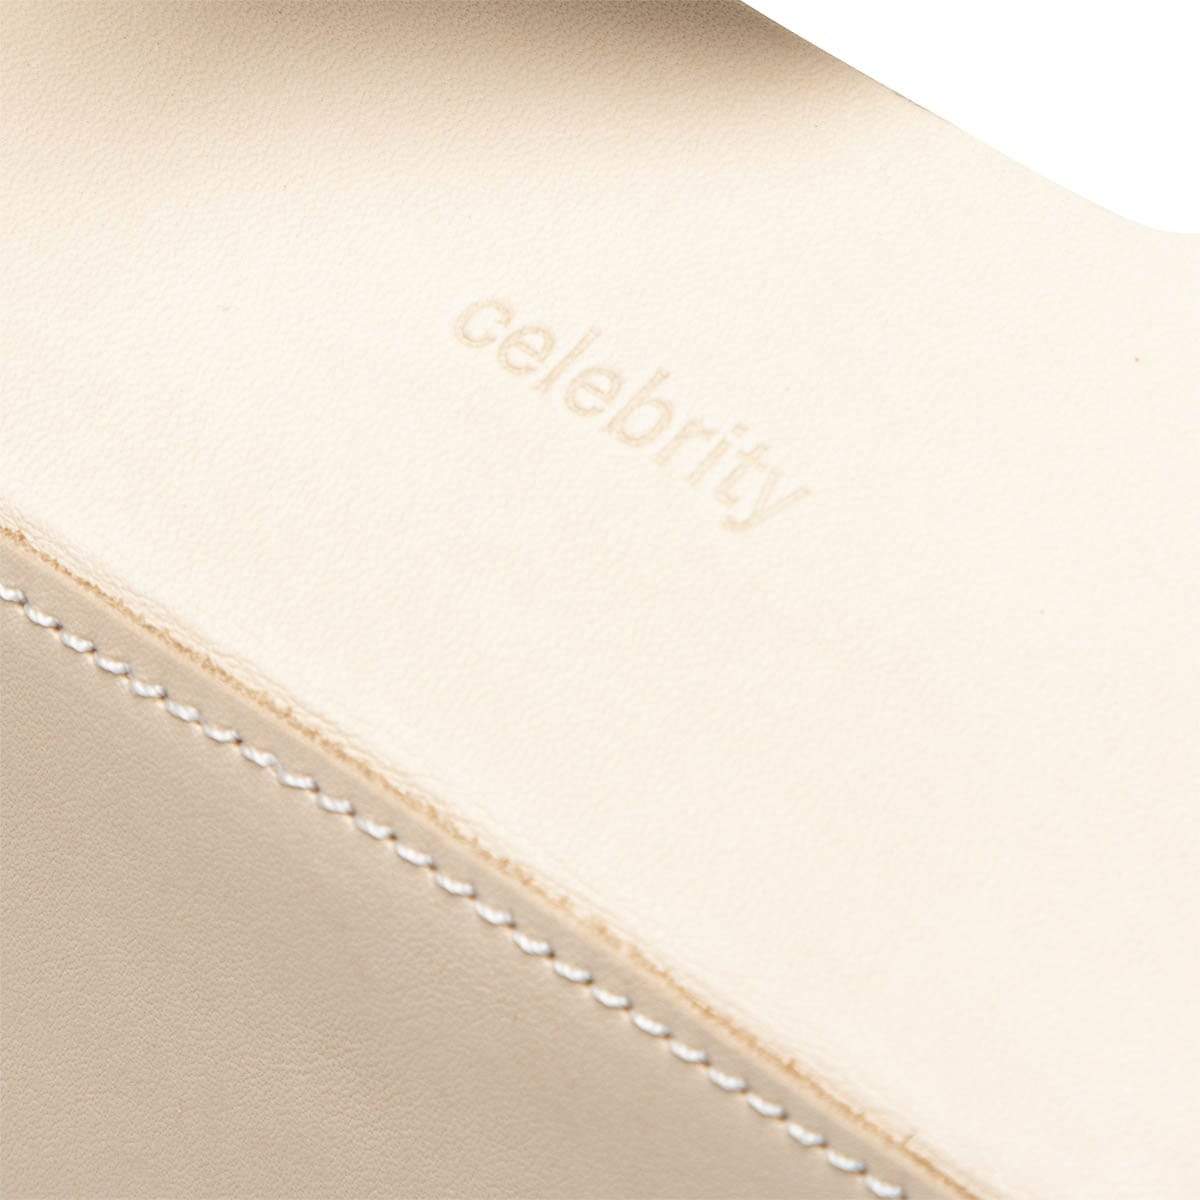 Hender Scheme Bags & Accessories NATURAL / O/S TISSUE BOX CASE FOR CELEBRITY